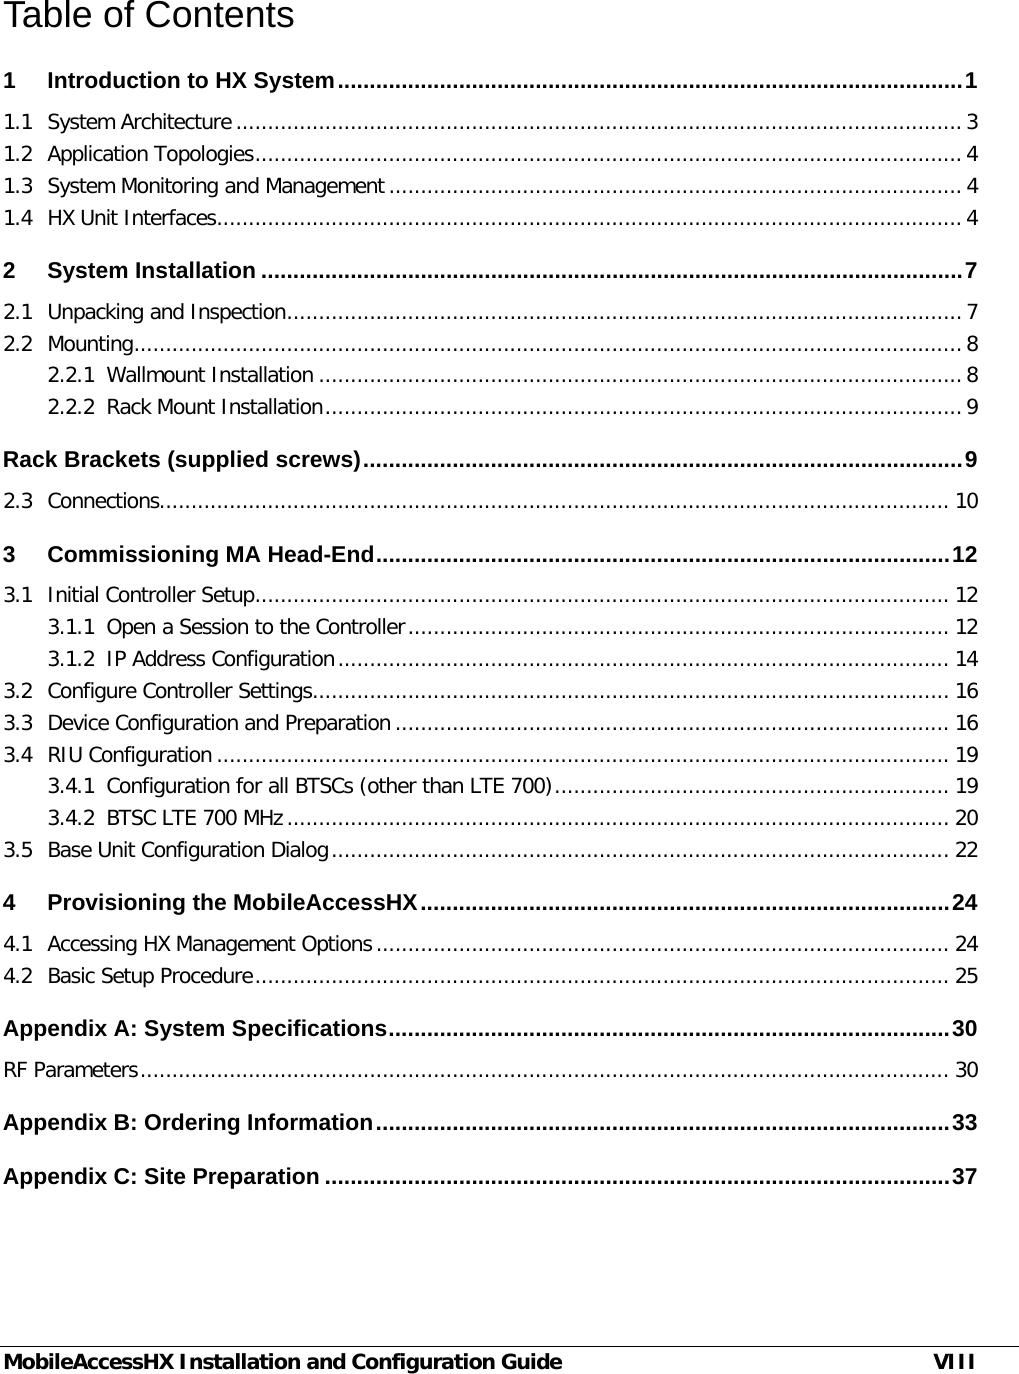  MobileAccessHX Installation and Configuration Guide VIII Table of Contents 1 Introduction to HX System .................................................................................................. 1 1.1 System Architecture .................................................................................................................. 3 1.2 Application Topologies ............................................................................................................... 4 1.3 System Monitoring and Management .......................................................................................... 4 1.4 HX Unit Interfaces ..................................................................................................................... 4 2 System Installation .............................................................................................................. 7 2.1 Unpacking and Inspection .......................................................................................................... 7 2.2 Mounting .................................................................................................................................. 8 2.2.1 Wallmount Installation ..................................................................................................... 8 2.2.2 Rack Mount Installation .................................................................................................... 9 Rack Brackets (supplied screws) .............................................................................................. 9 2.3 Connections............................................................................................................................ 10 3 Commissioning MA Head-End .......................................................................................... 12 3.1 Initial Controller Setup ............................................................................................................. 12 3.1.1 Open a Session to the Controller ..................................................................................... 12 3.1.2 IP Address Configuration ................................................................................................ 14 3.2 Configure Controller Settings .................................................................................................... 16 3.3 Device Configuration and Preparation ....................................................................................... 16 3.4 RIU Configuration ................................................................................................................... 19 3.4.1 Configuration for all BTSCs (other than LTE 700) .............................................................. 19 3.4.2 BTSC LTE 700 MHz ........................................................................................................ 20 3.5 Base Unit Configuration Dialog ................................................................................................. 22 4 Provisioning the MobileAccessHX ................................................................................... 24 4.1 Accessing HX Management Options .......................................................................................... 24 4.2 Basic Setup Procedure ............................................................................................................. 25 Appendix A: System Specifications ........................................................................................ 30 RF Parameters ............................................................................................................................... 30 Appendix B: Ordering Information .......................................................................................... 33 Appendix C: Site Preparation .................................................................................................. 37 